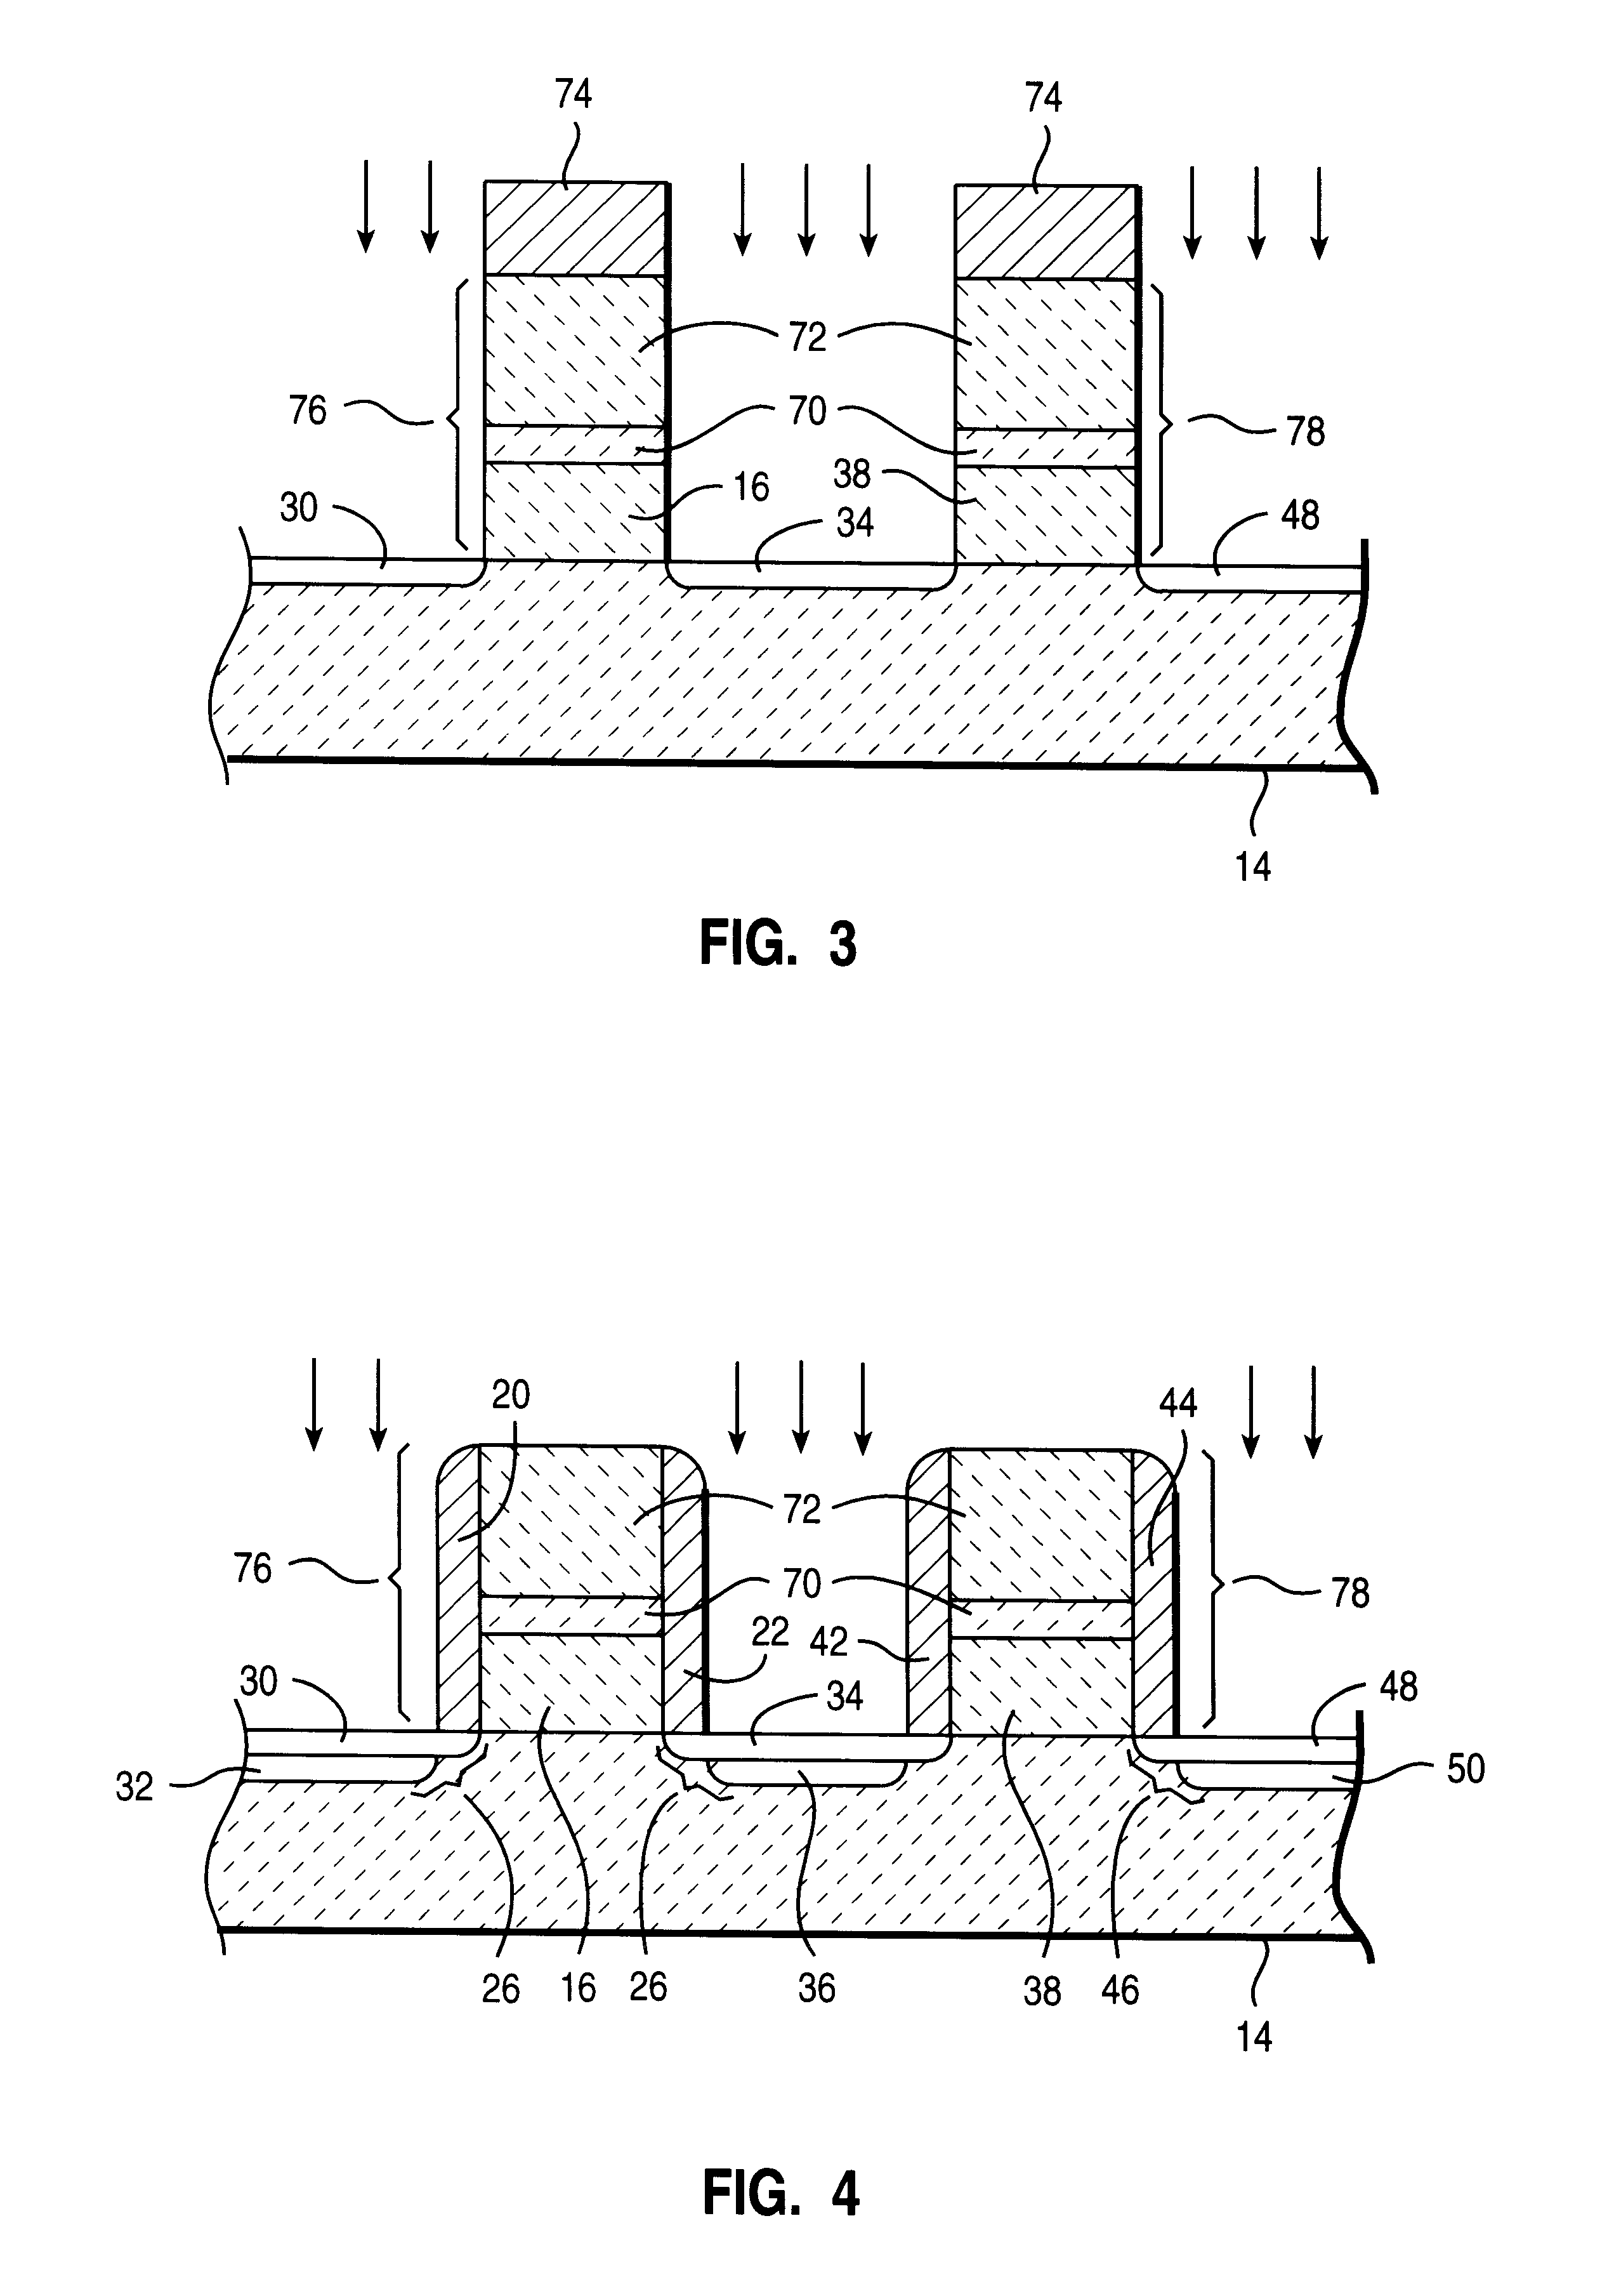 Method of making high performance MOSFET with polished gate and source/drain feature